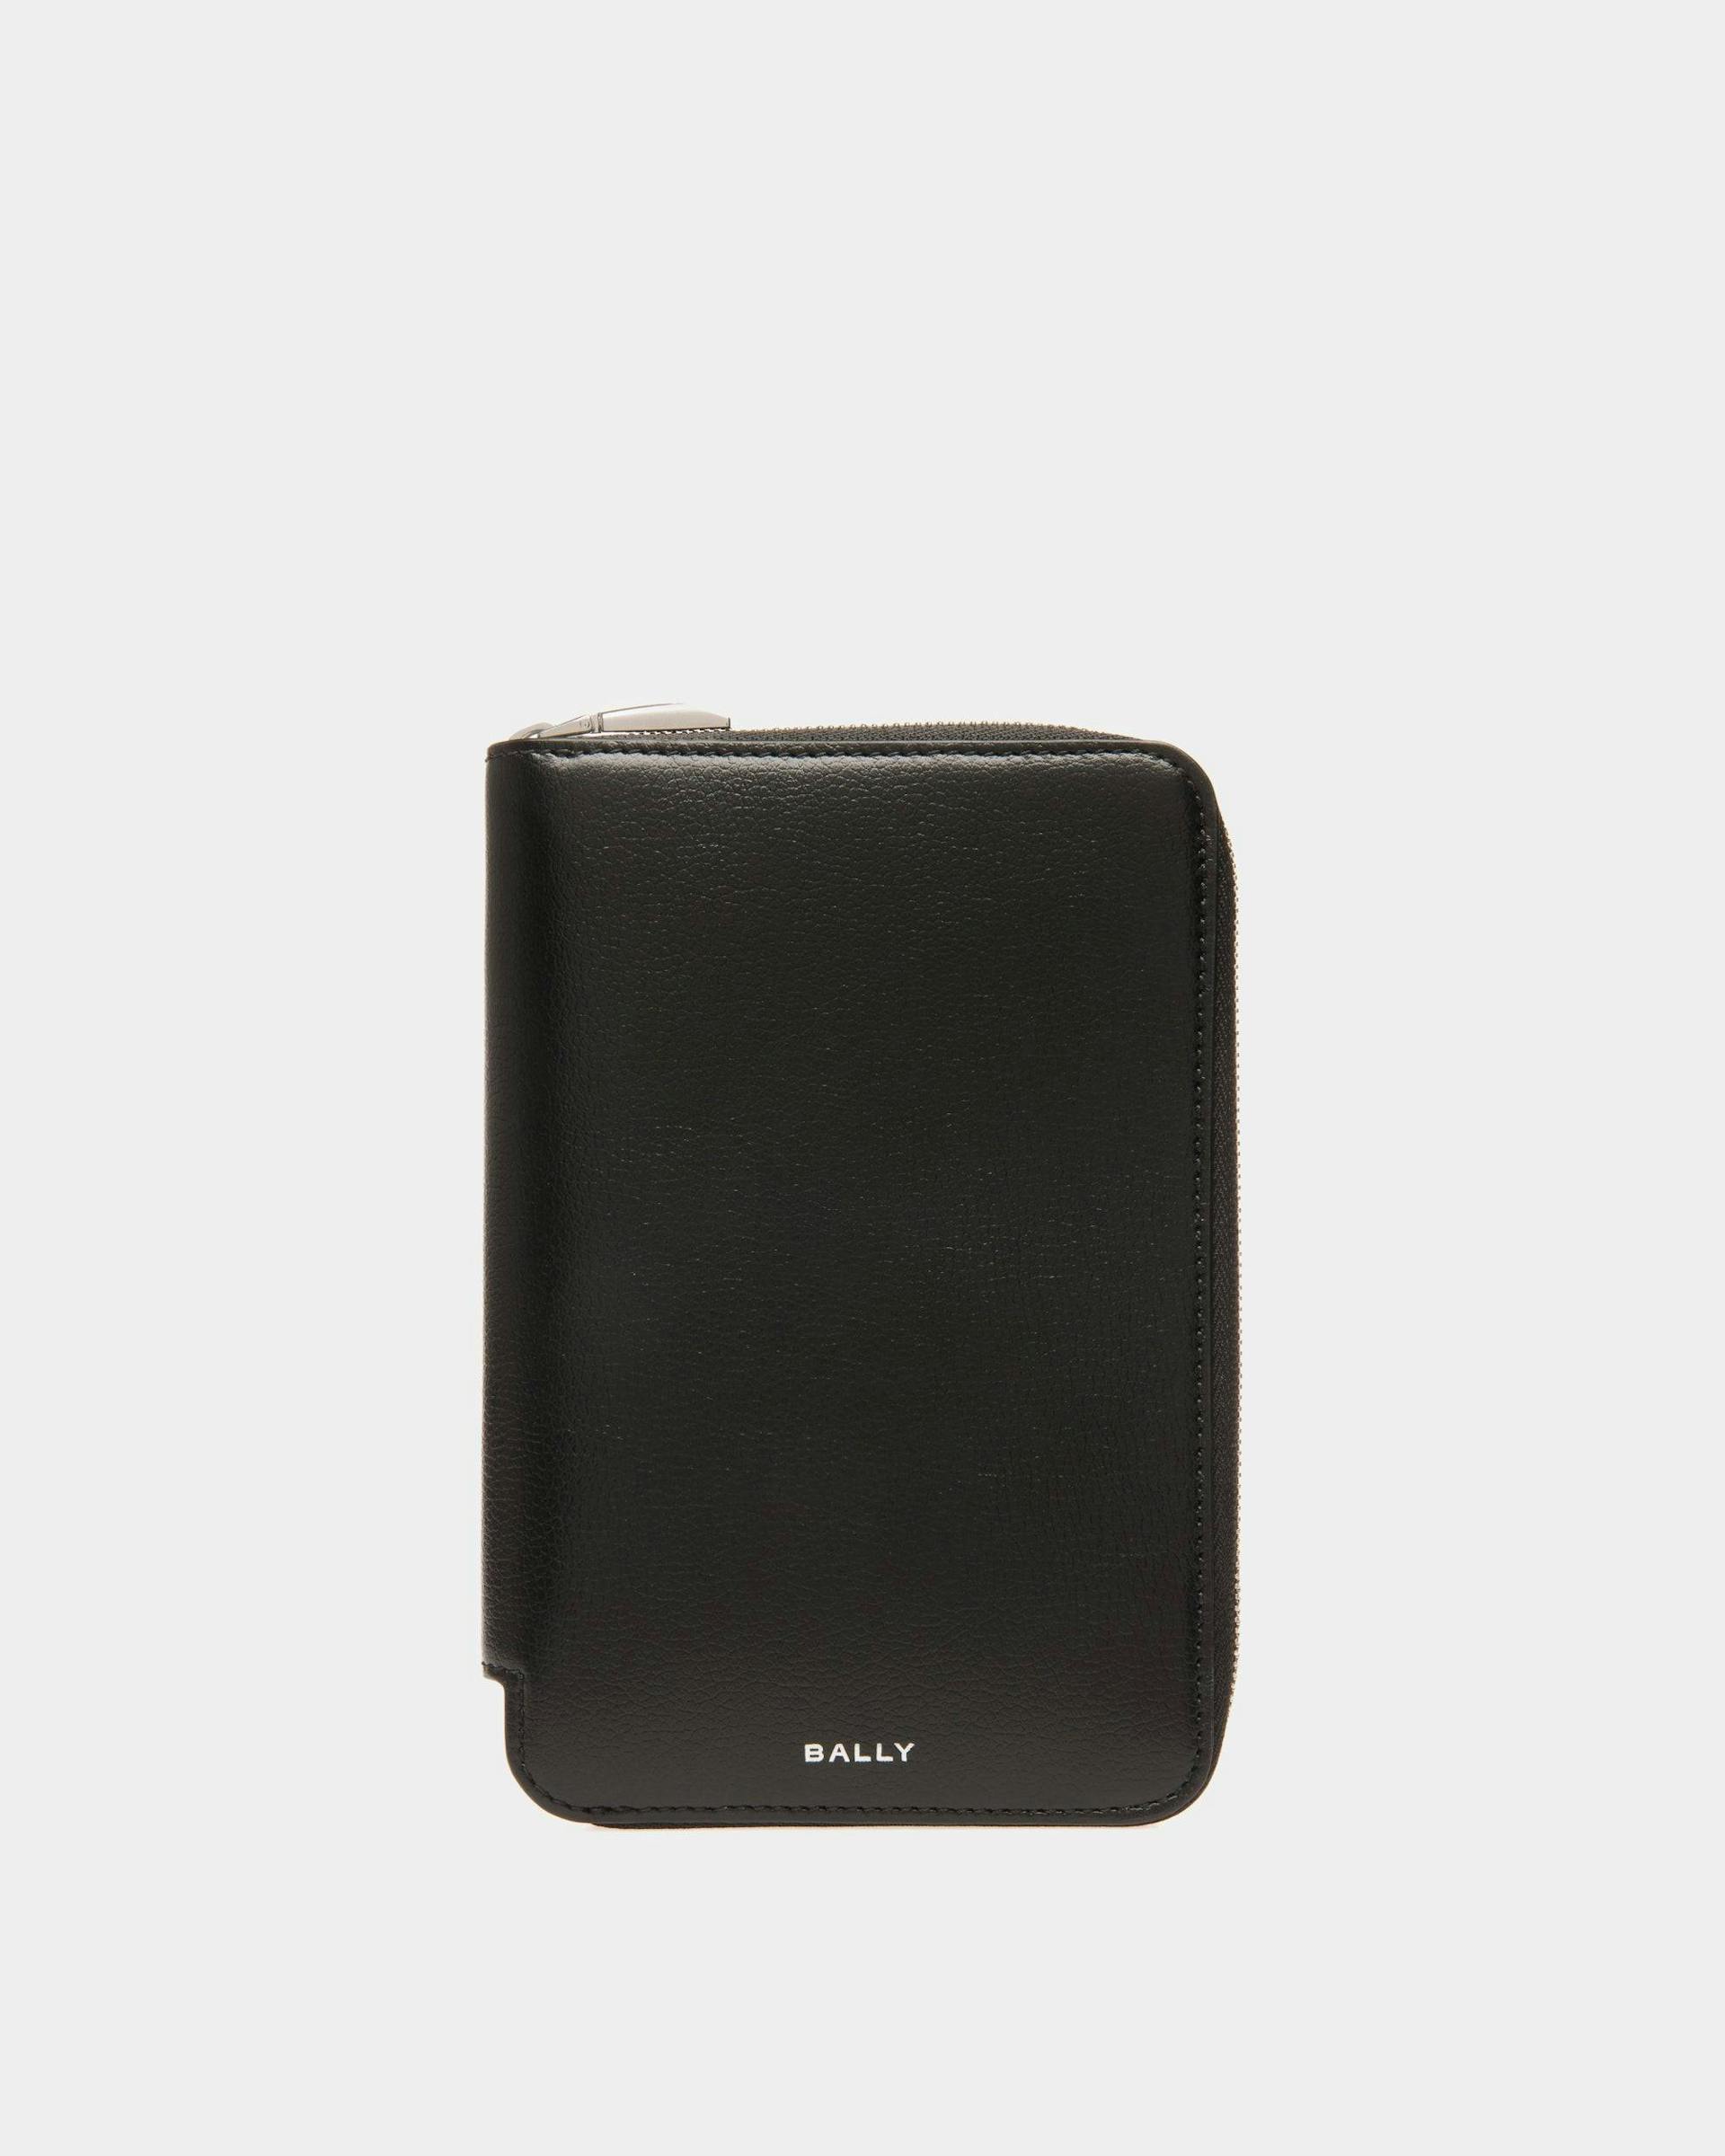 Men's Banque Travel Wallet In Black Leather | Bally | Still Life Front